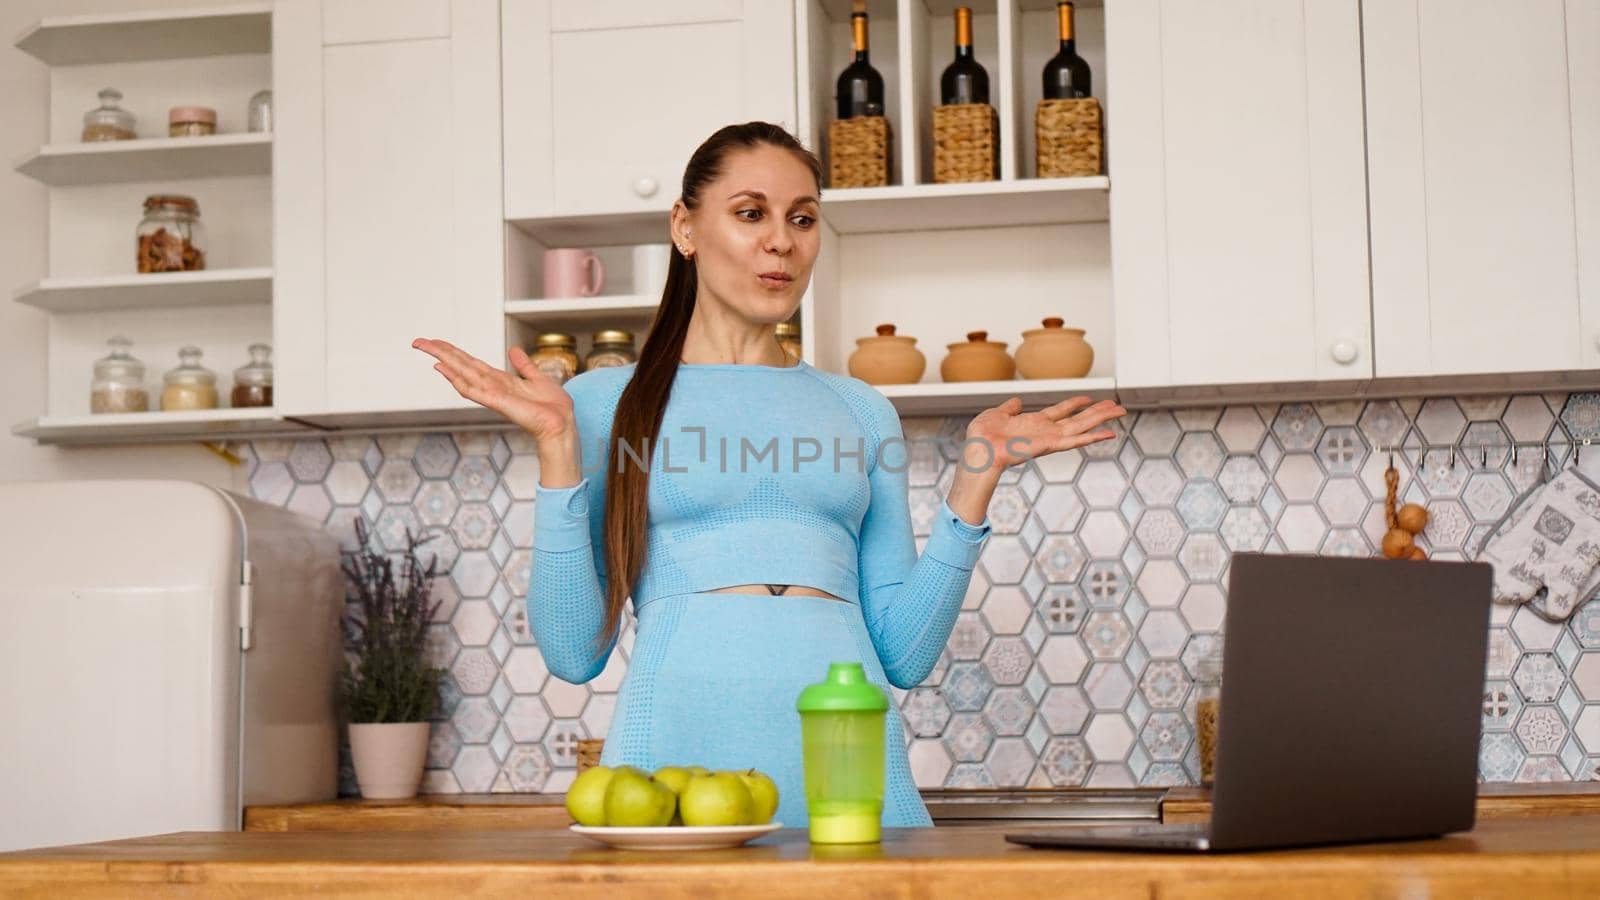 Smiling woman using computer in modern kitchen interior. Cooking and healthy lifestyle concept. Woman broadcasts online and gestures emotionally